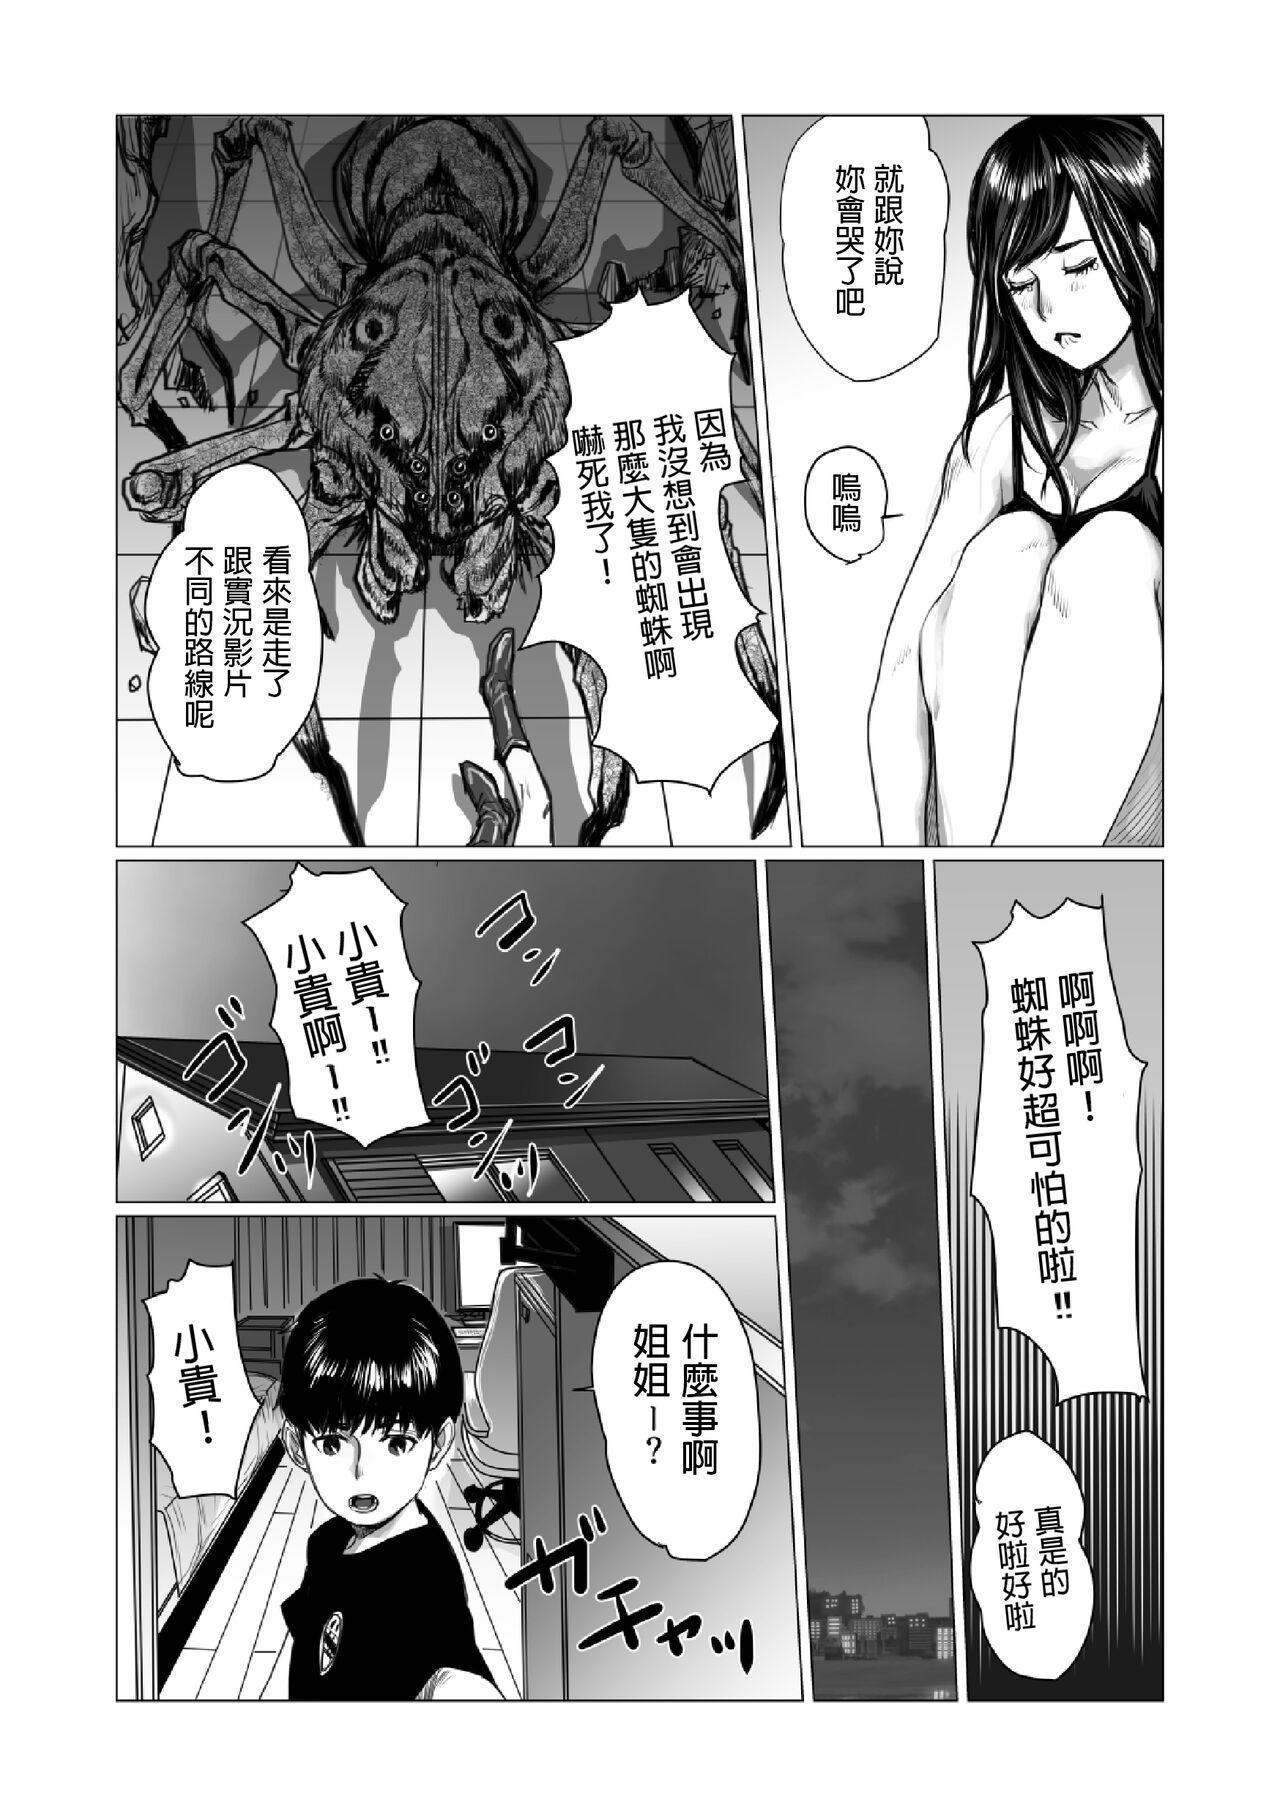 Exposed 弟のゲーム脳と姉のゲーム性 中文翻譯 - Original Monster Cock - Page 7